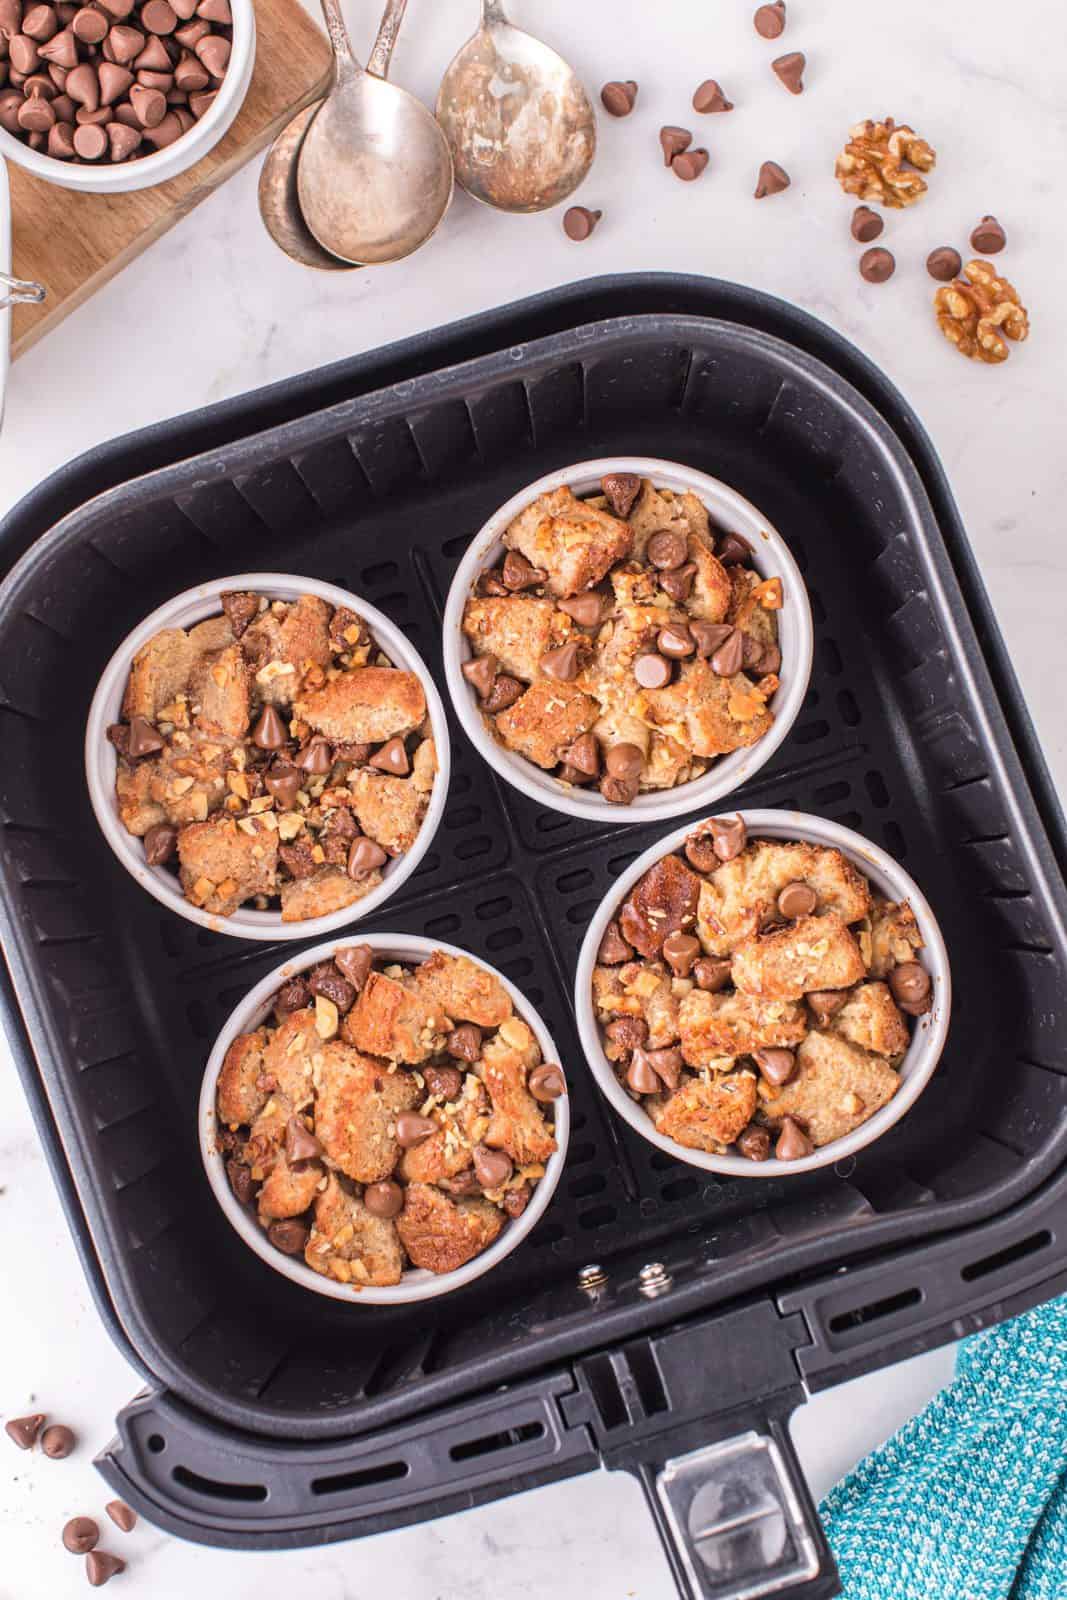 Finished Bread Pudding in air fryer basket.